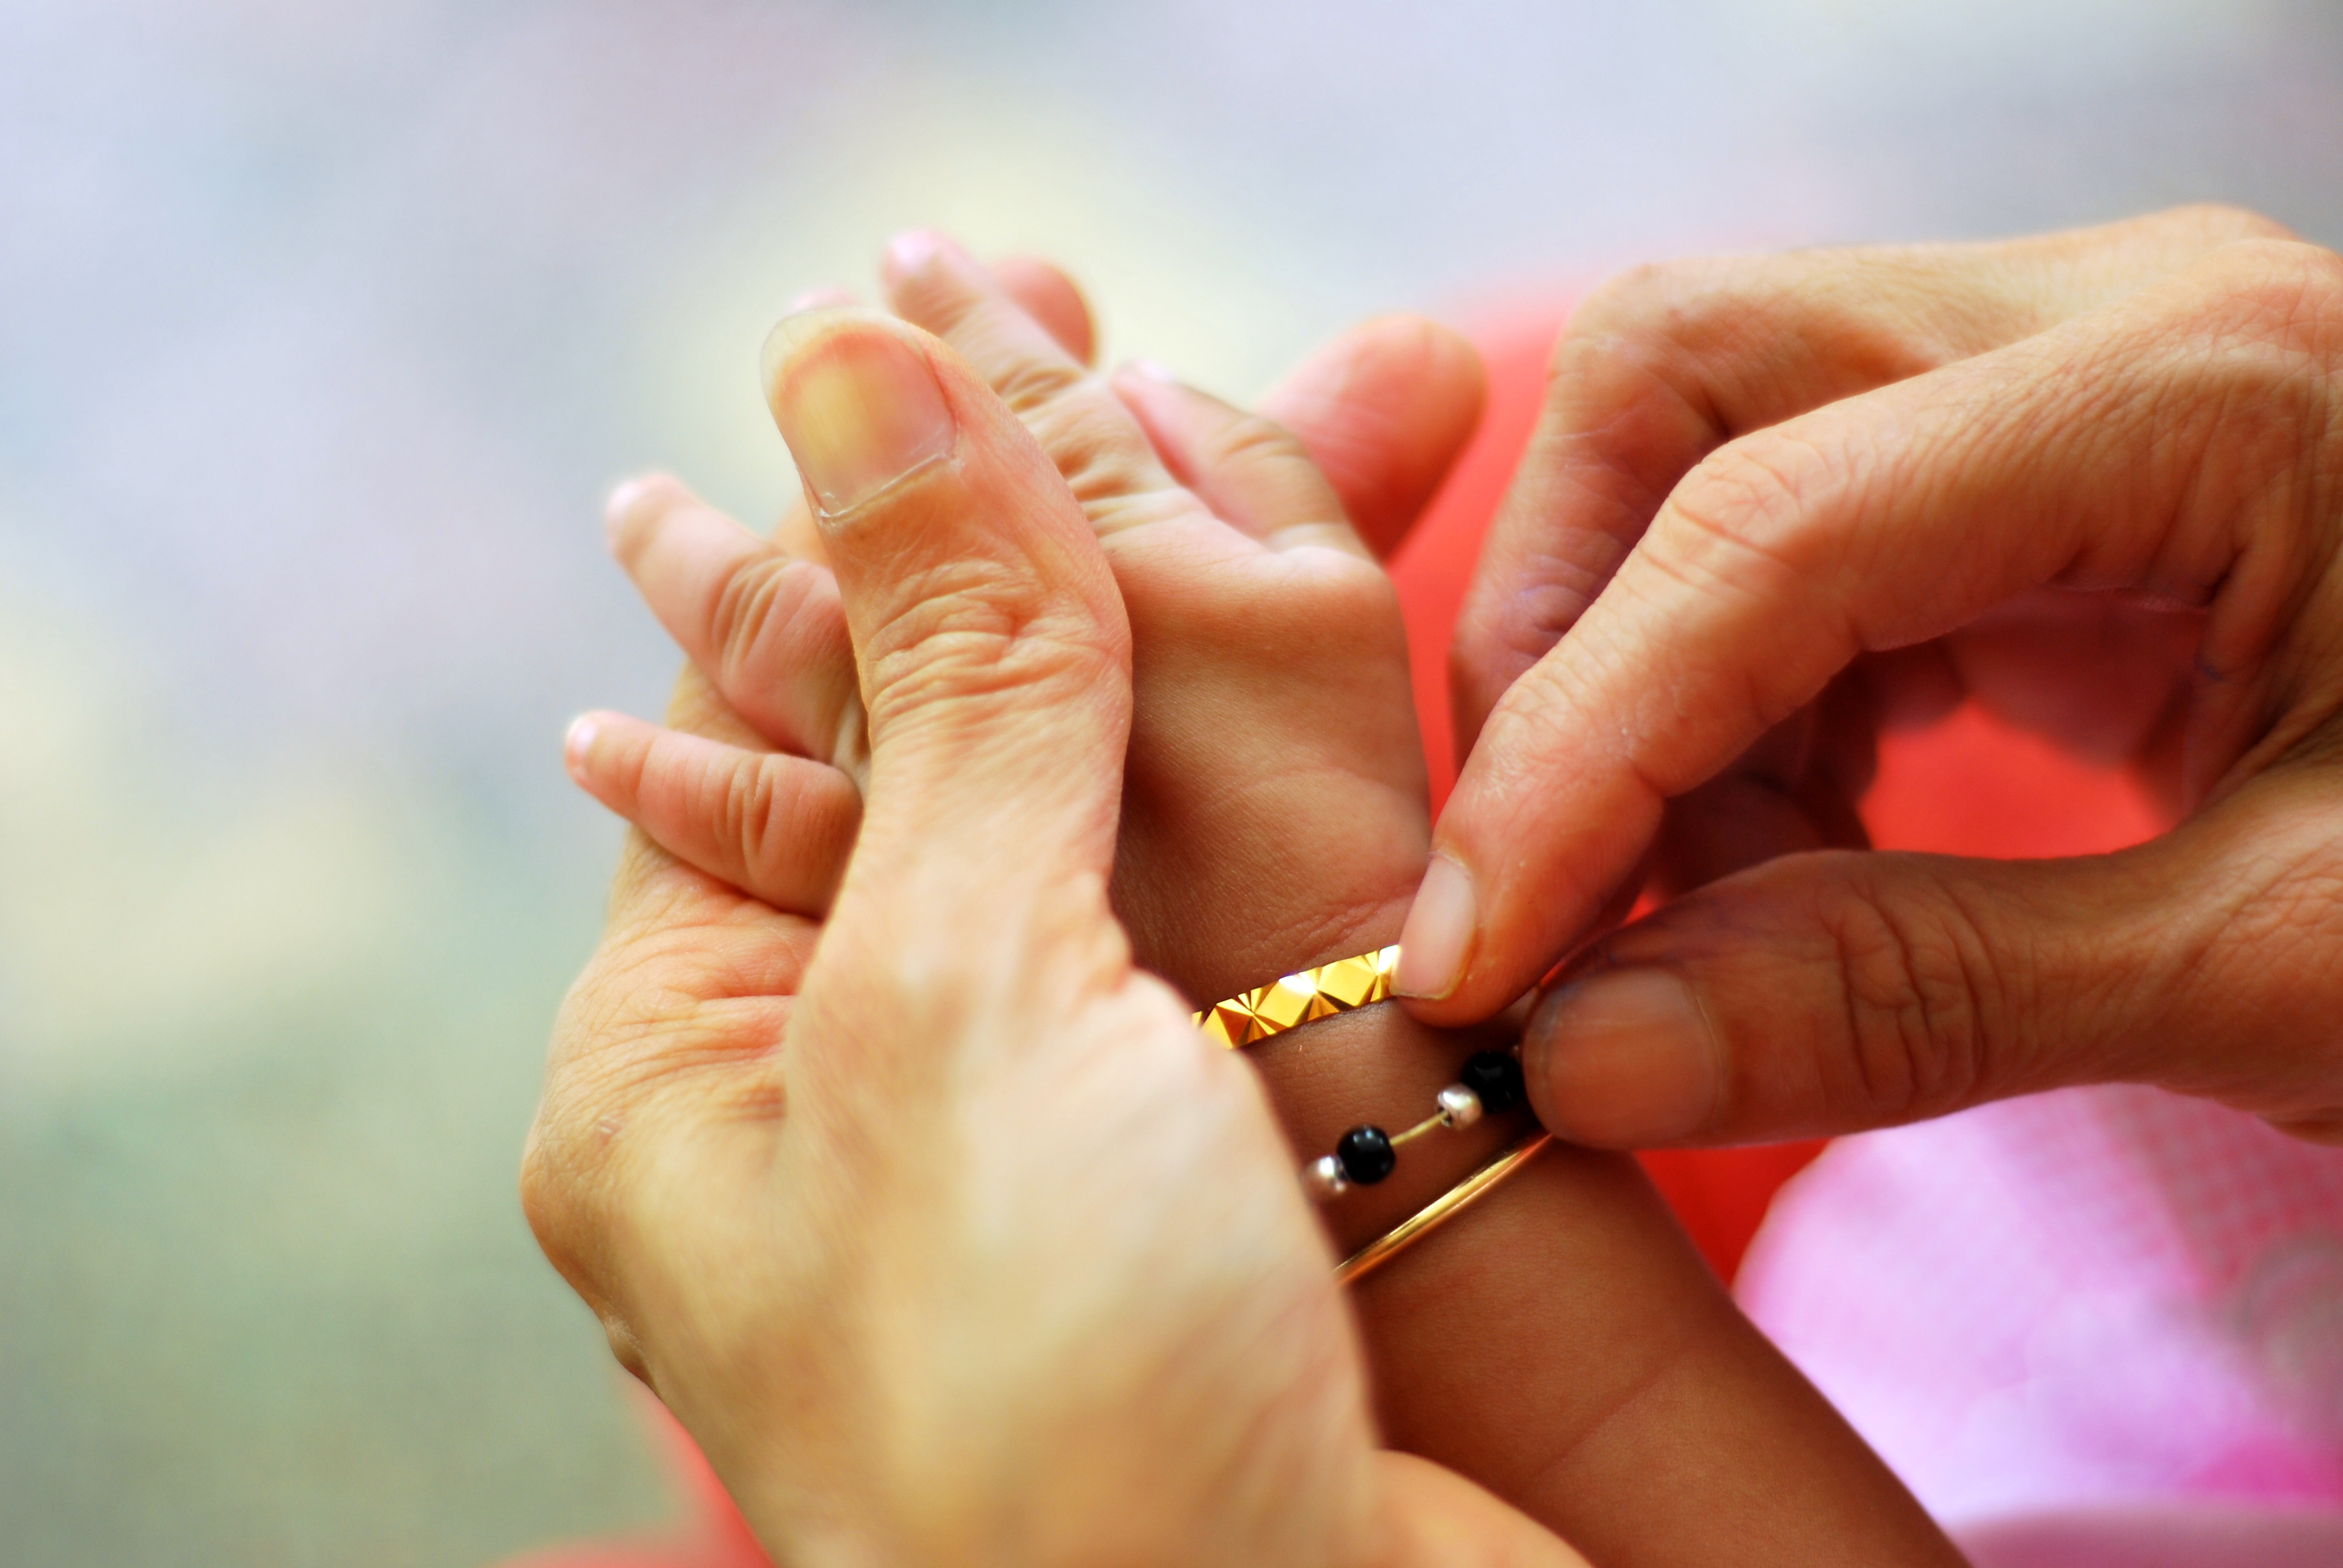 A mother's hands grips a child's hand, who is wearing a bracelet.